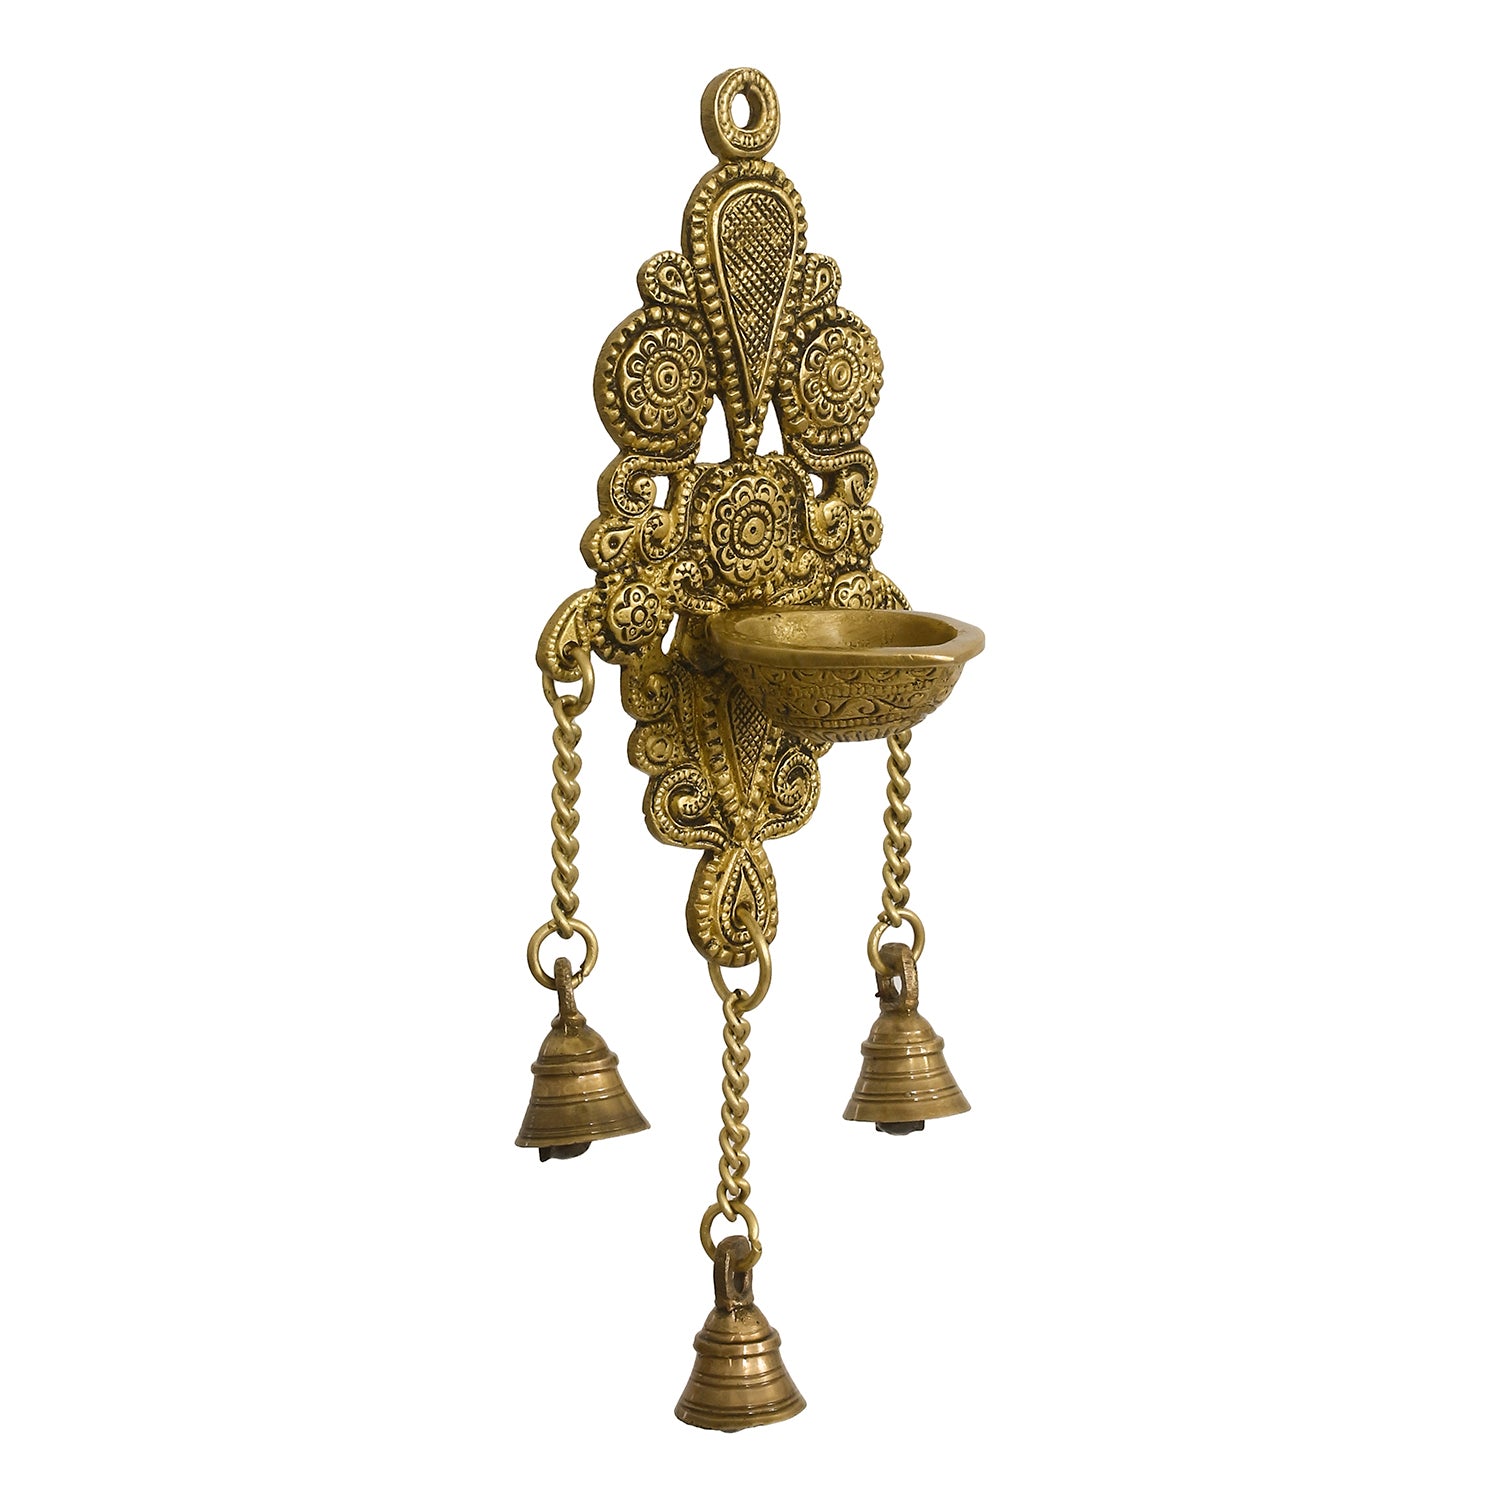 Golden Antique Finish Decorative Handcrafted Brass Wall Hanging Diya with Bells 2